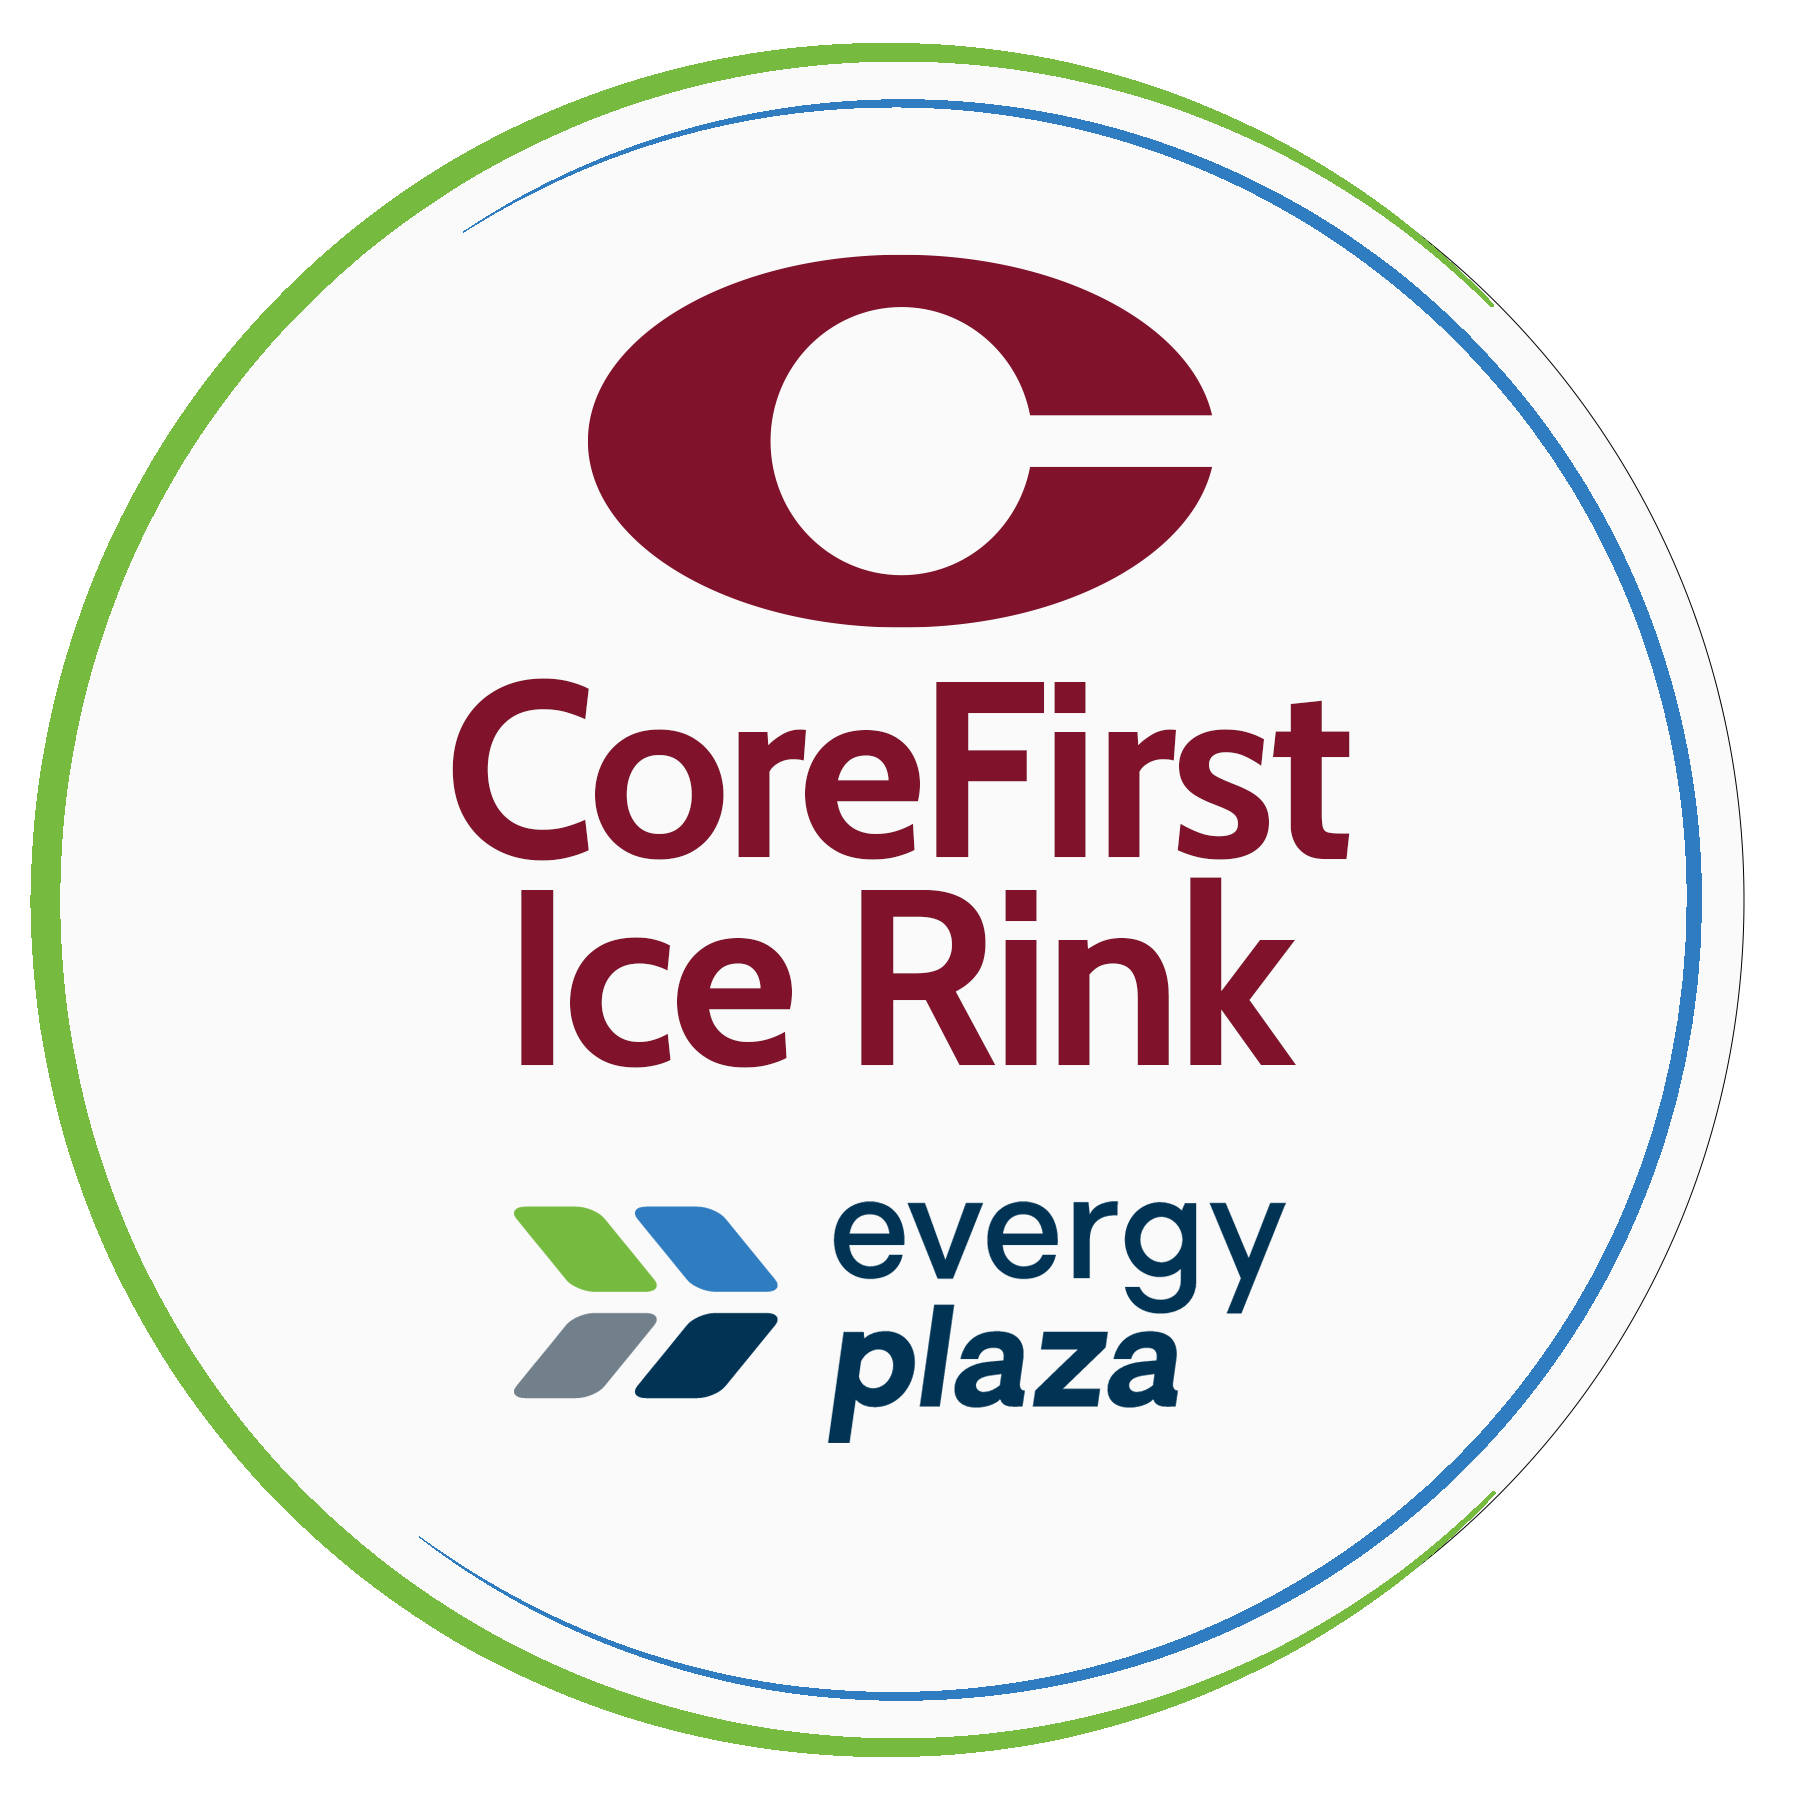 <h1 class="tribe-events-single-event-title">Corefirst Ice Rink at Evergy Plaza until January 29th 2023</h1>